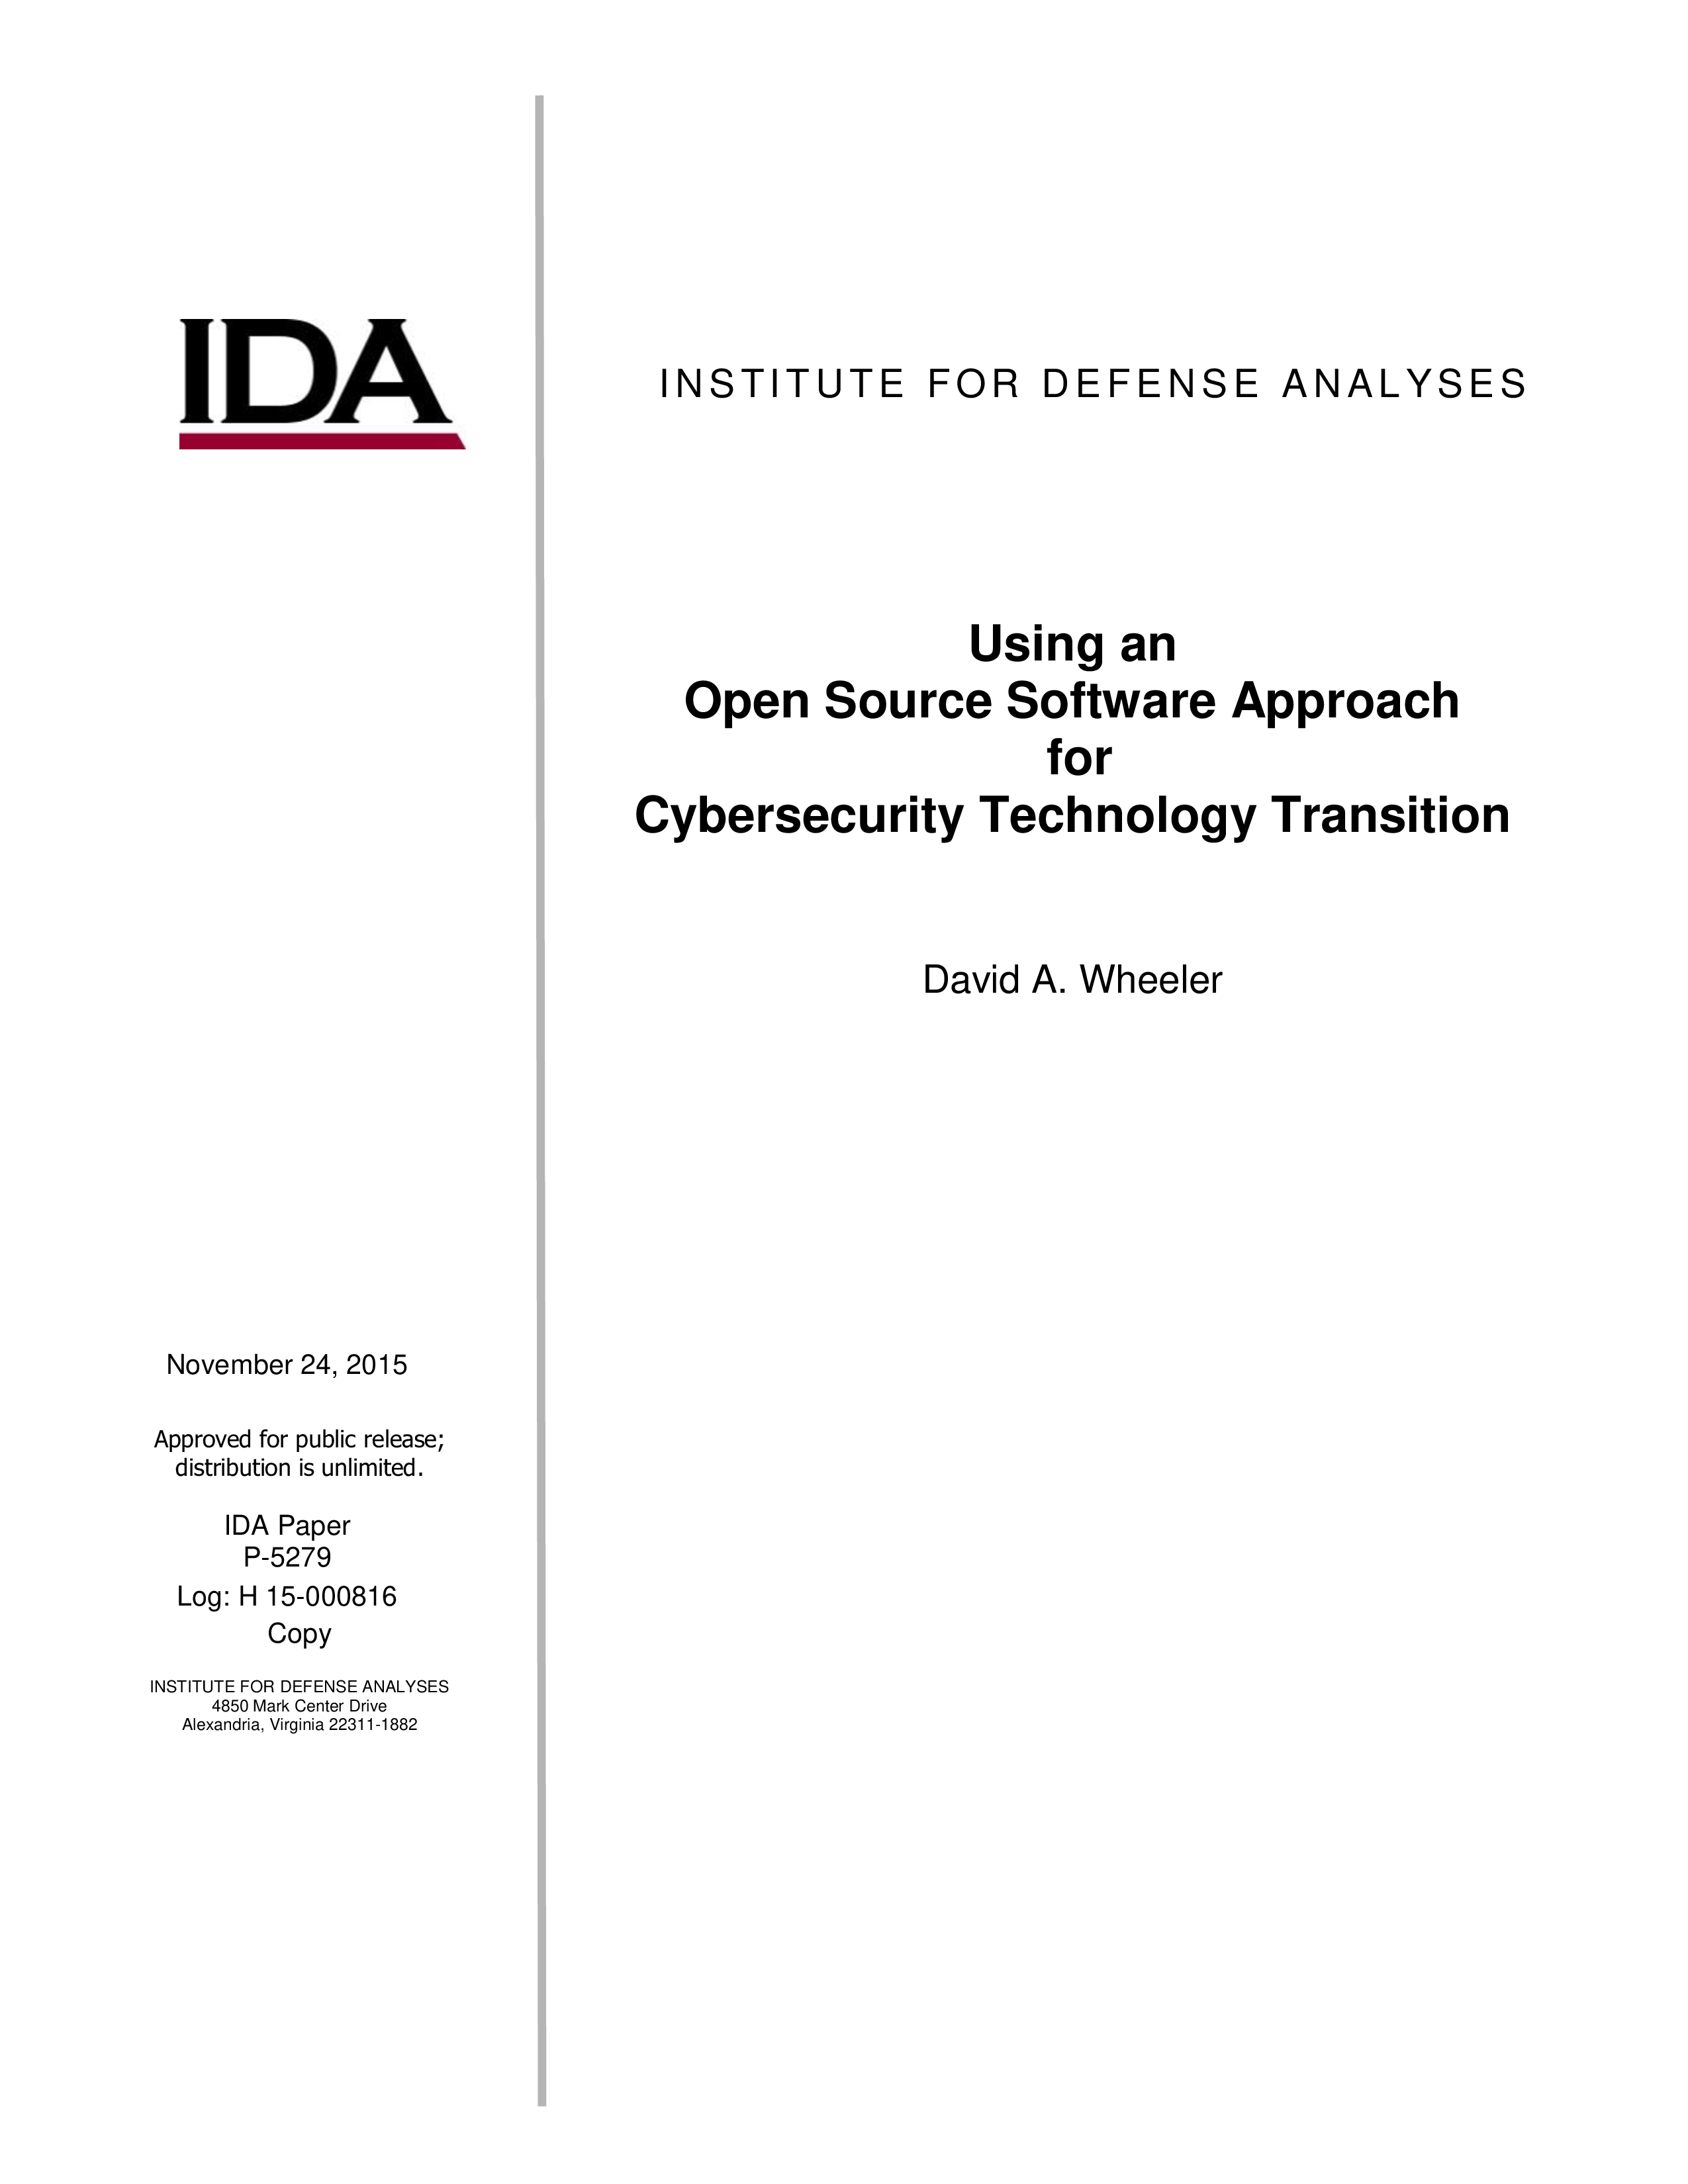 Using an Open Source Software Approach for Cybersecurity Technology Transition